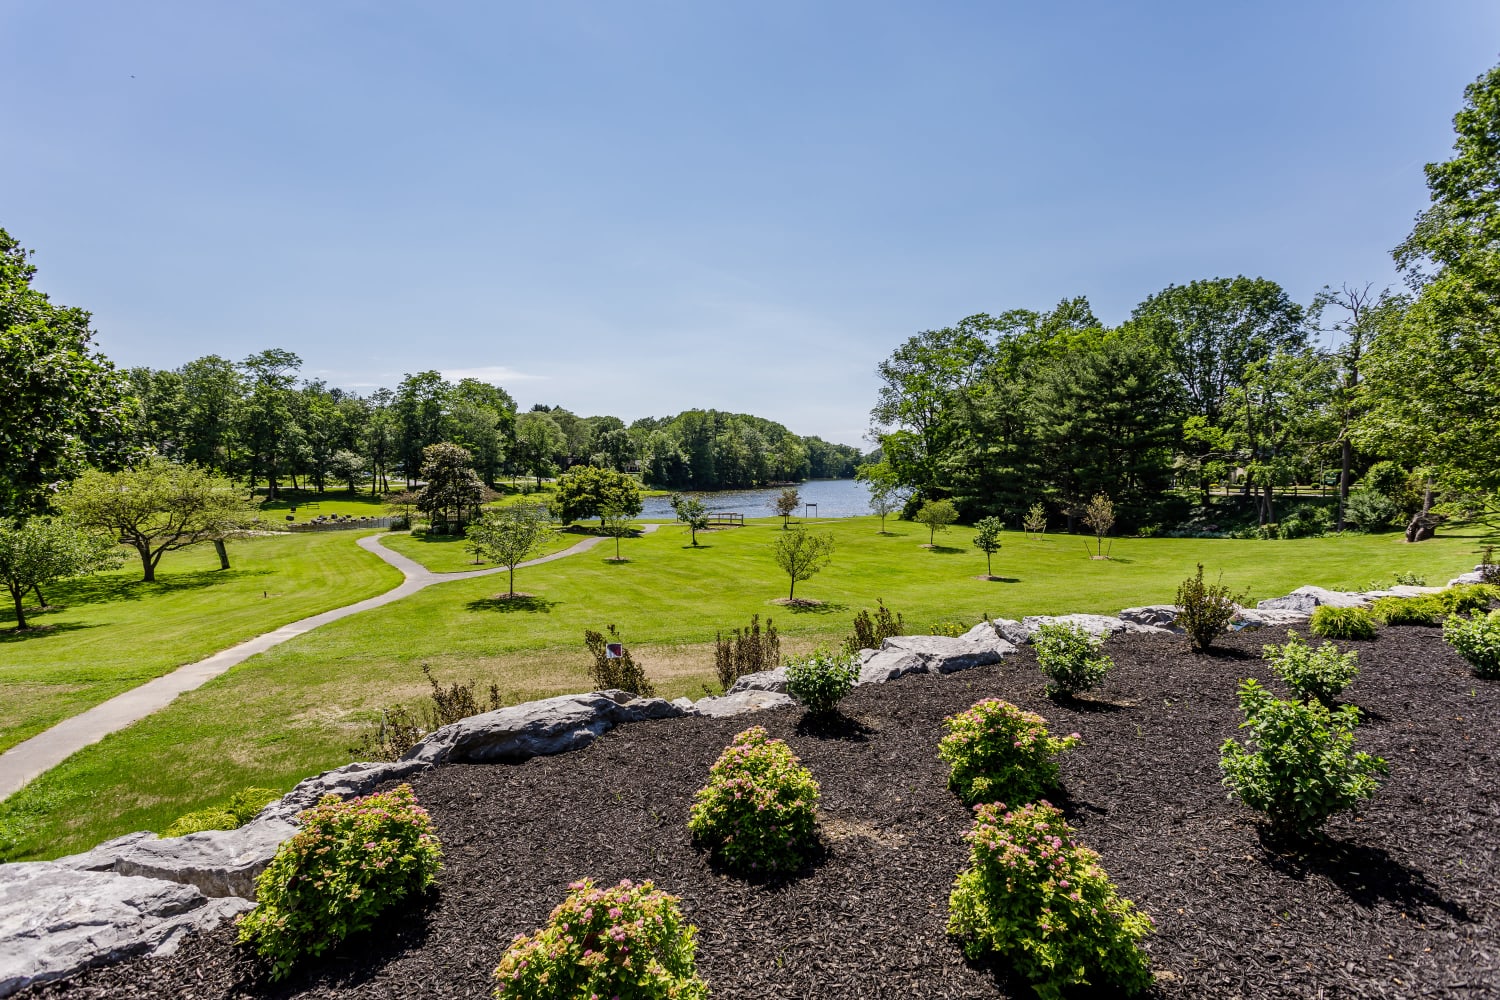 Expansive green space and landscaping, overlooking a lake